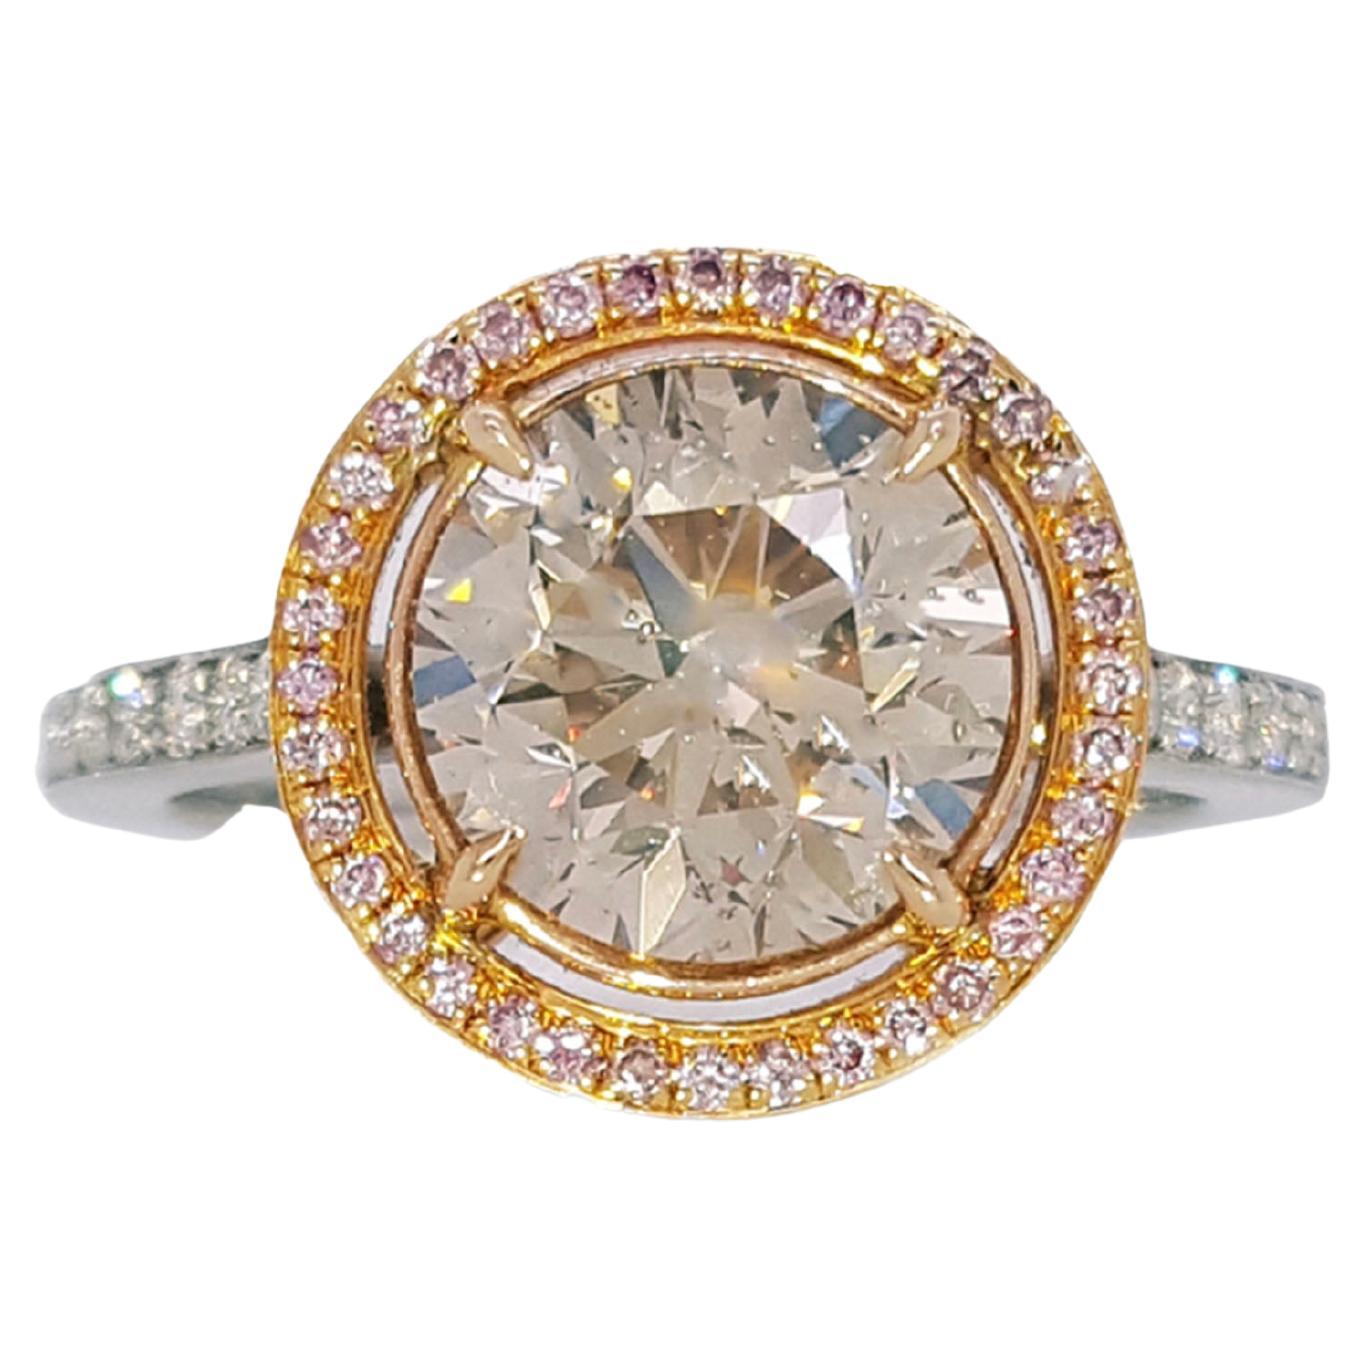 3.70 Carat Round Cut Brown, Pink And White Diamond, Engagement Ring in Platinum. For Sale